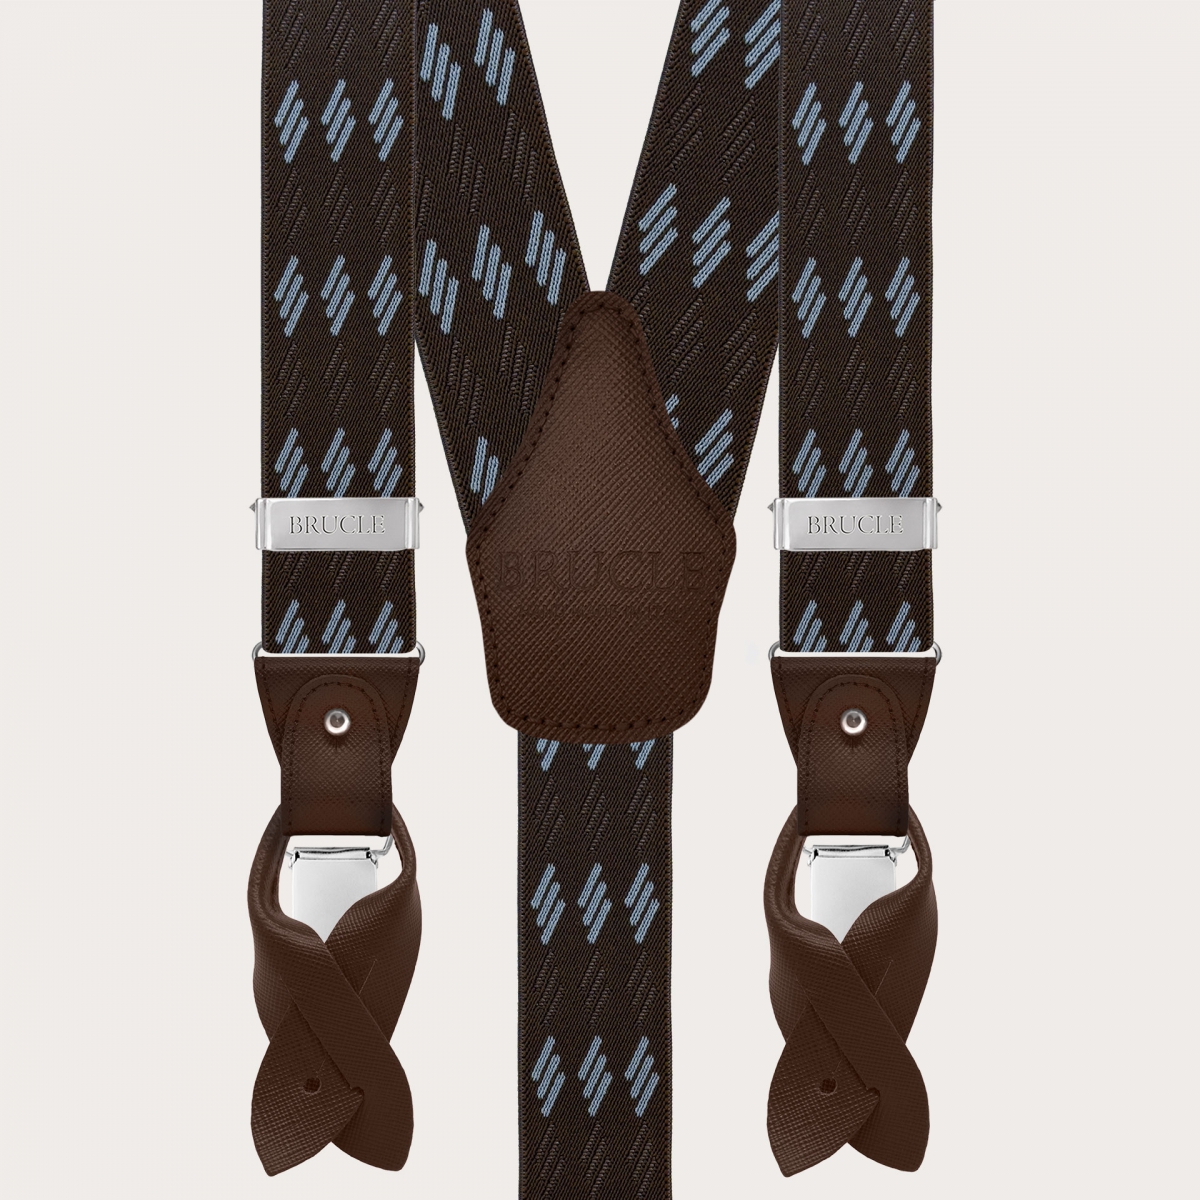 Brown elastic suspenders with blue stripes for buttons or clips